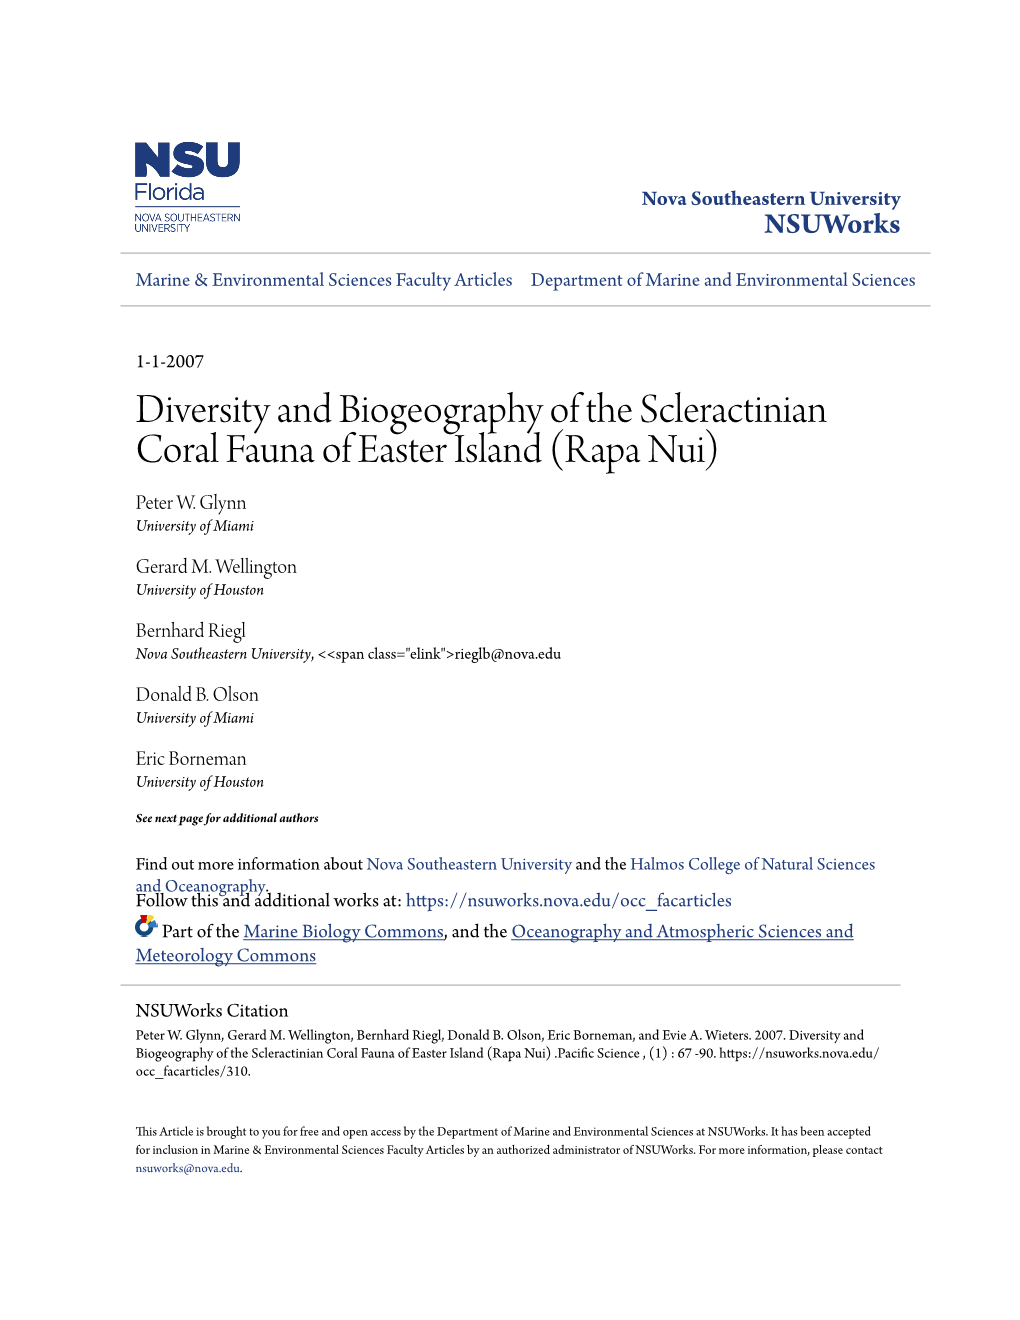 Diversity and Biogeography of the Scleractinian Coral Fauna of Easter Island (Rapa Nui) Peter W